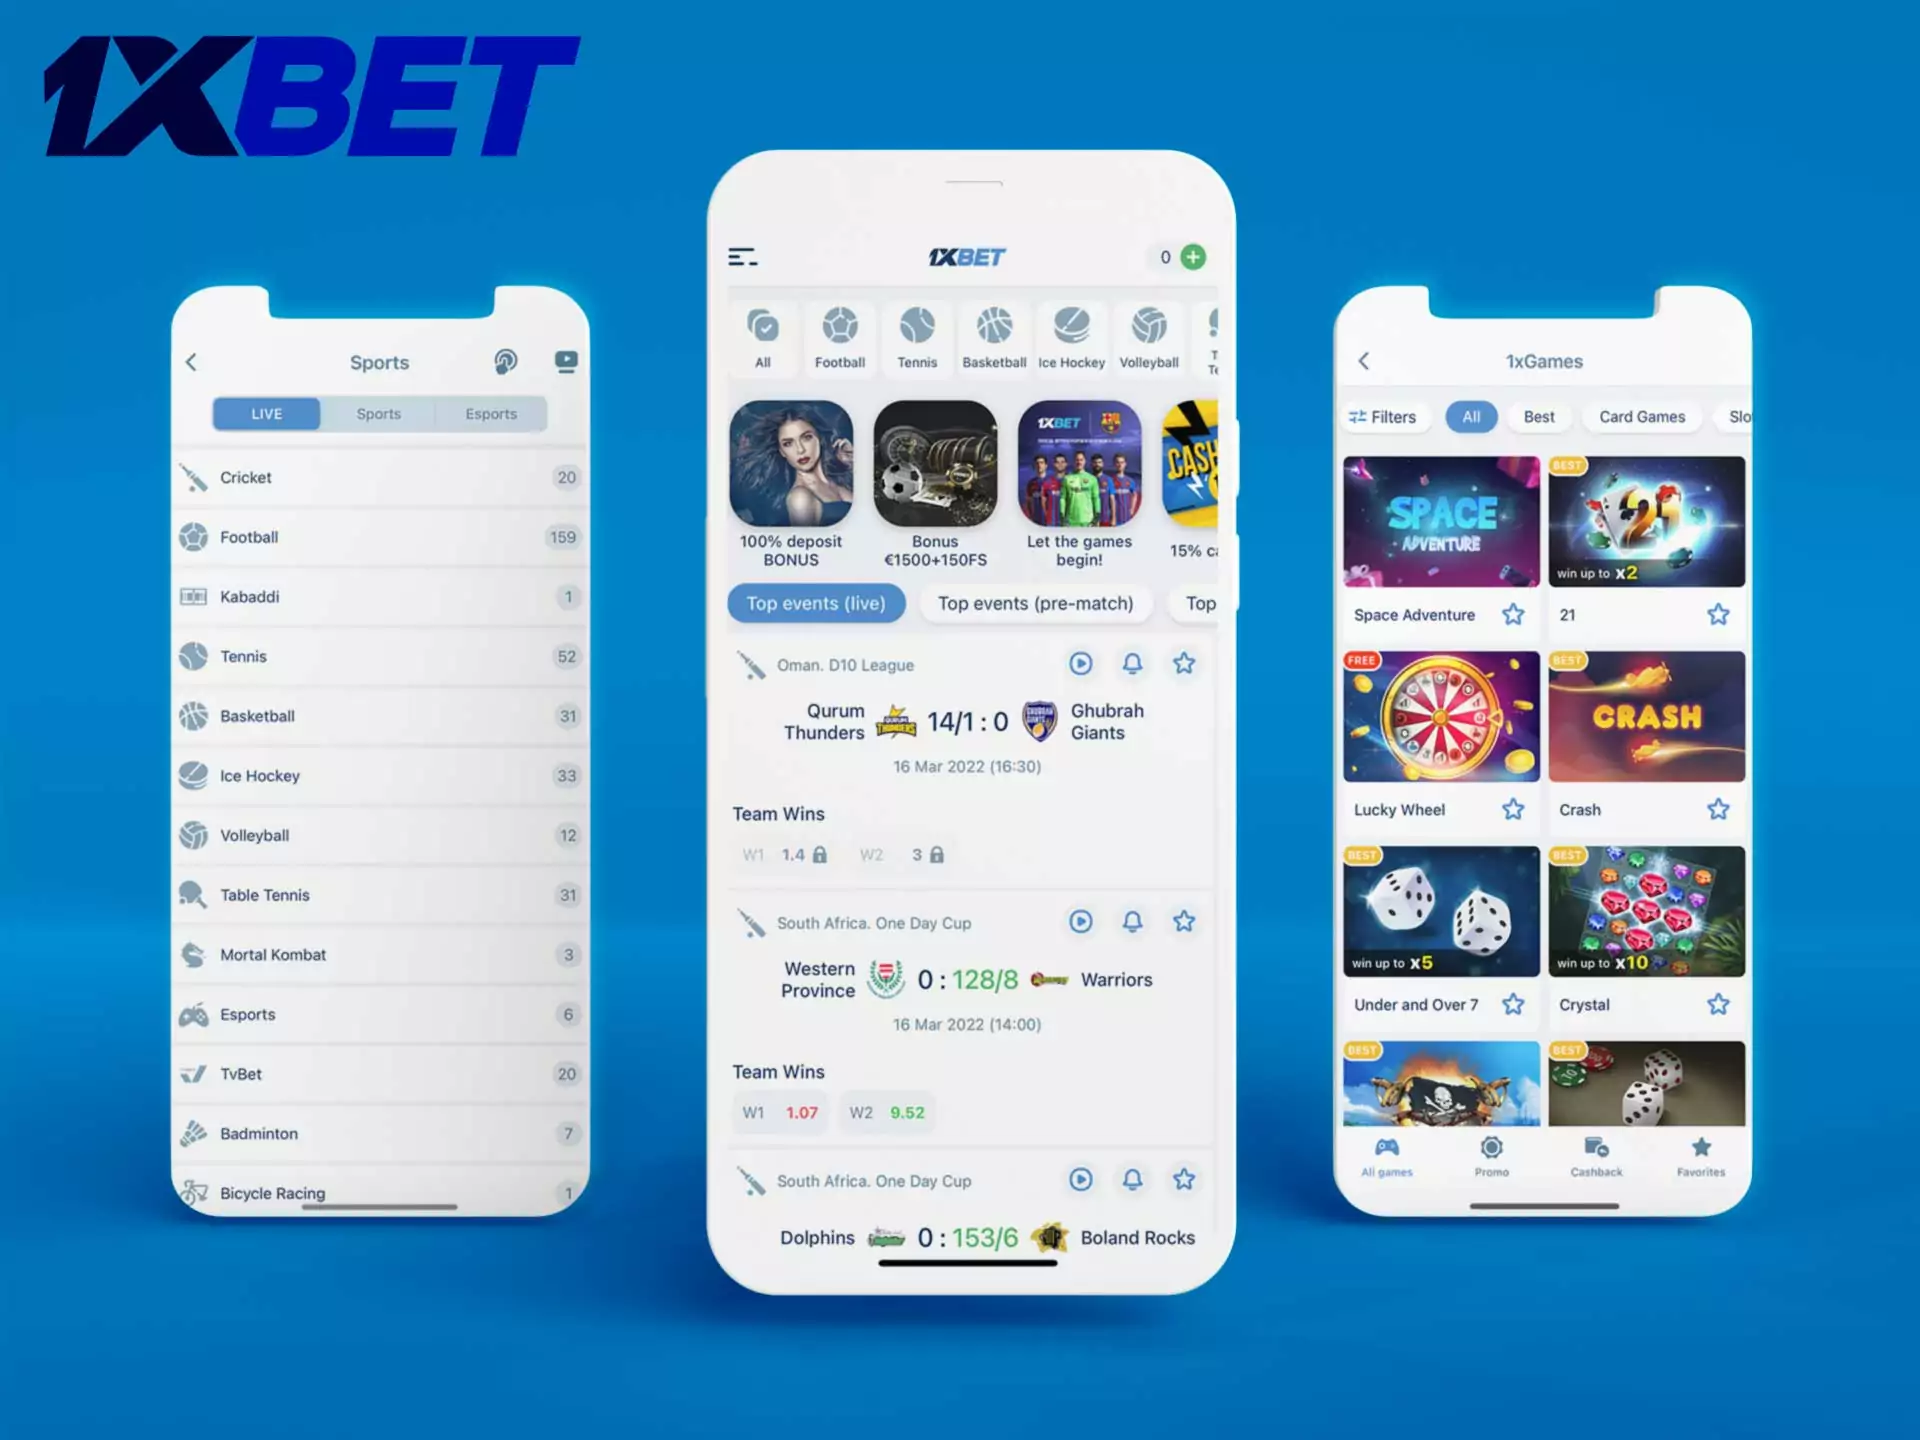 1xbet is a popular application in Bangladash, that provides sign up bonuses, live betting, virtual sports.